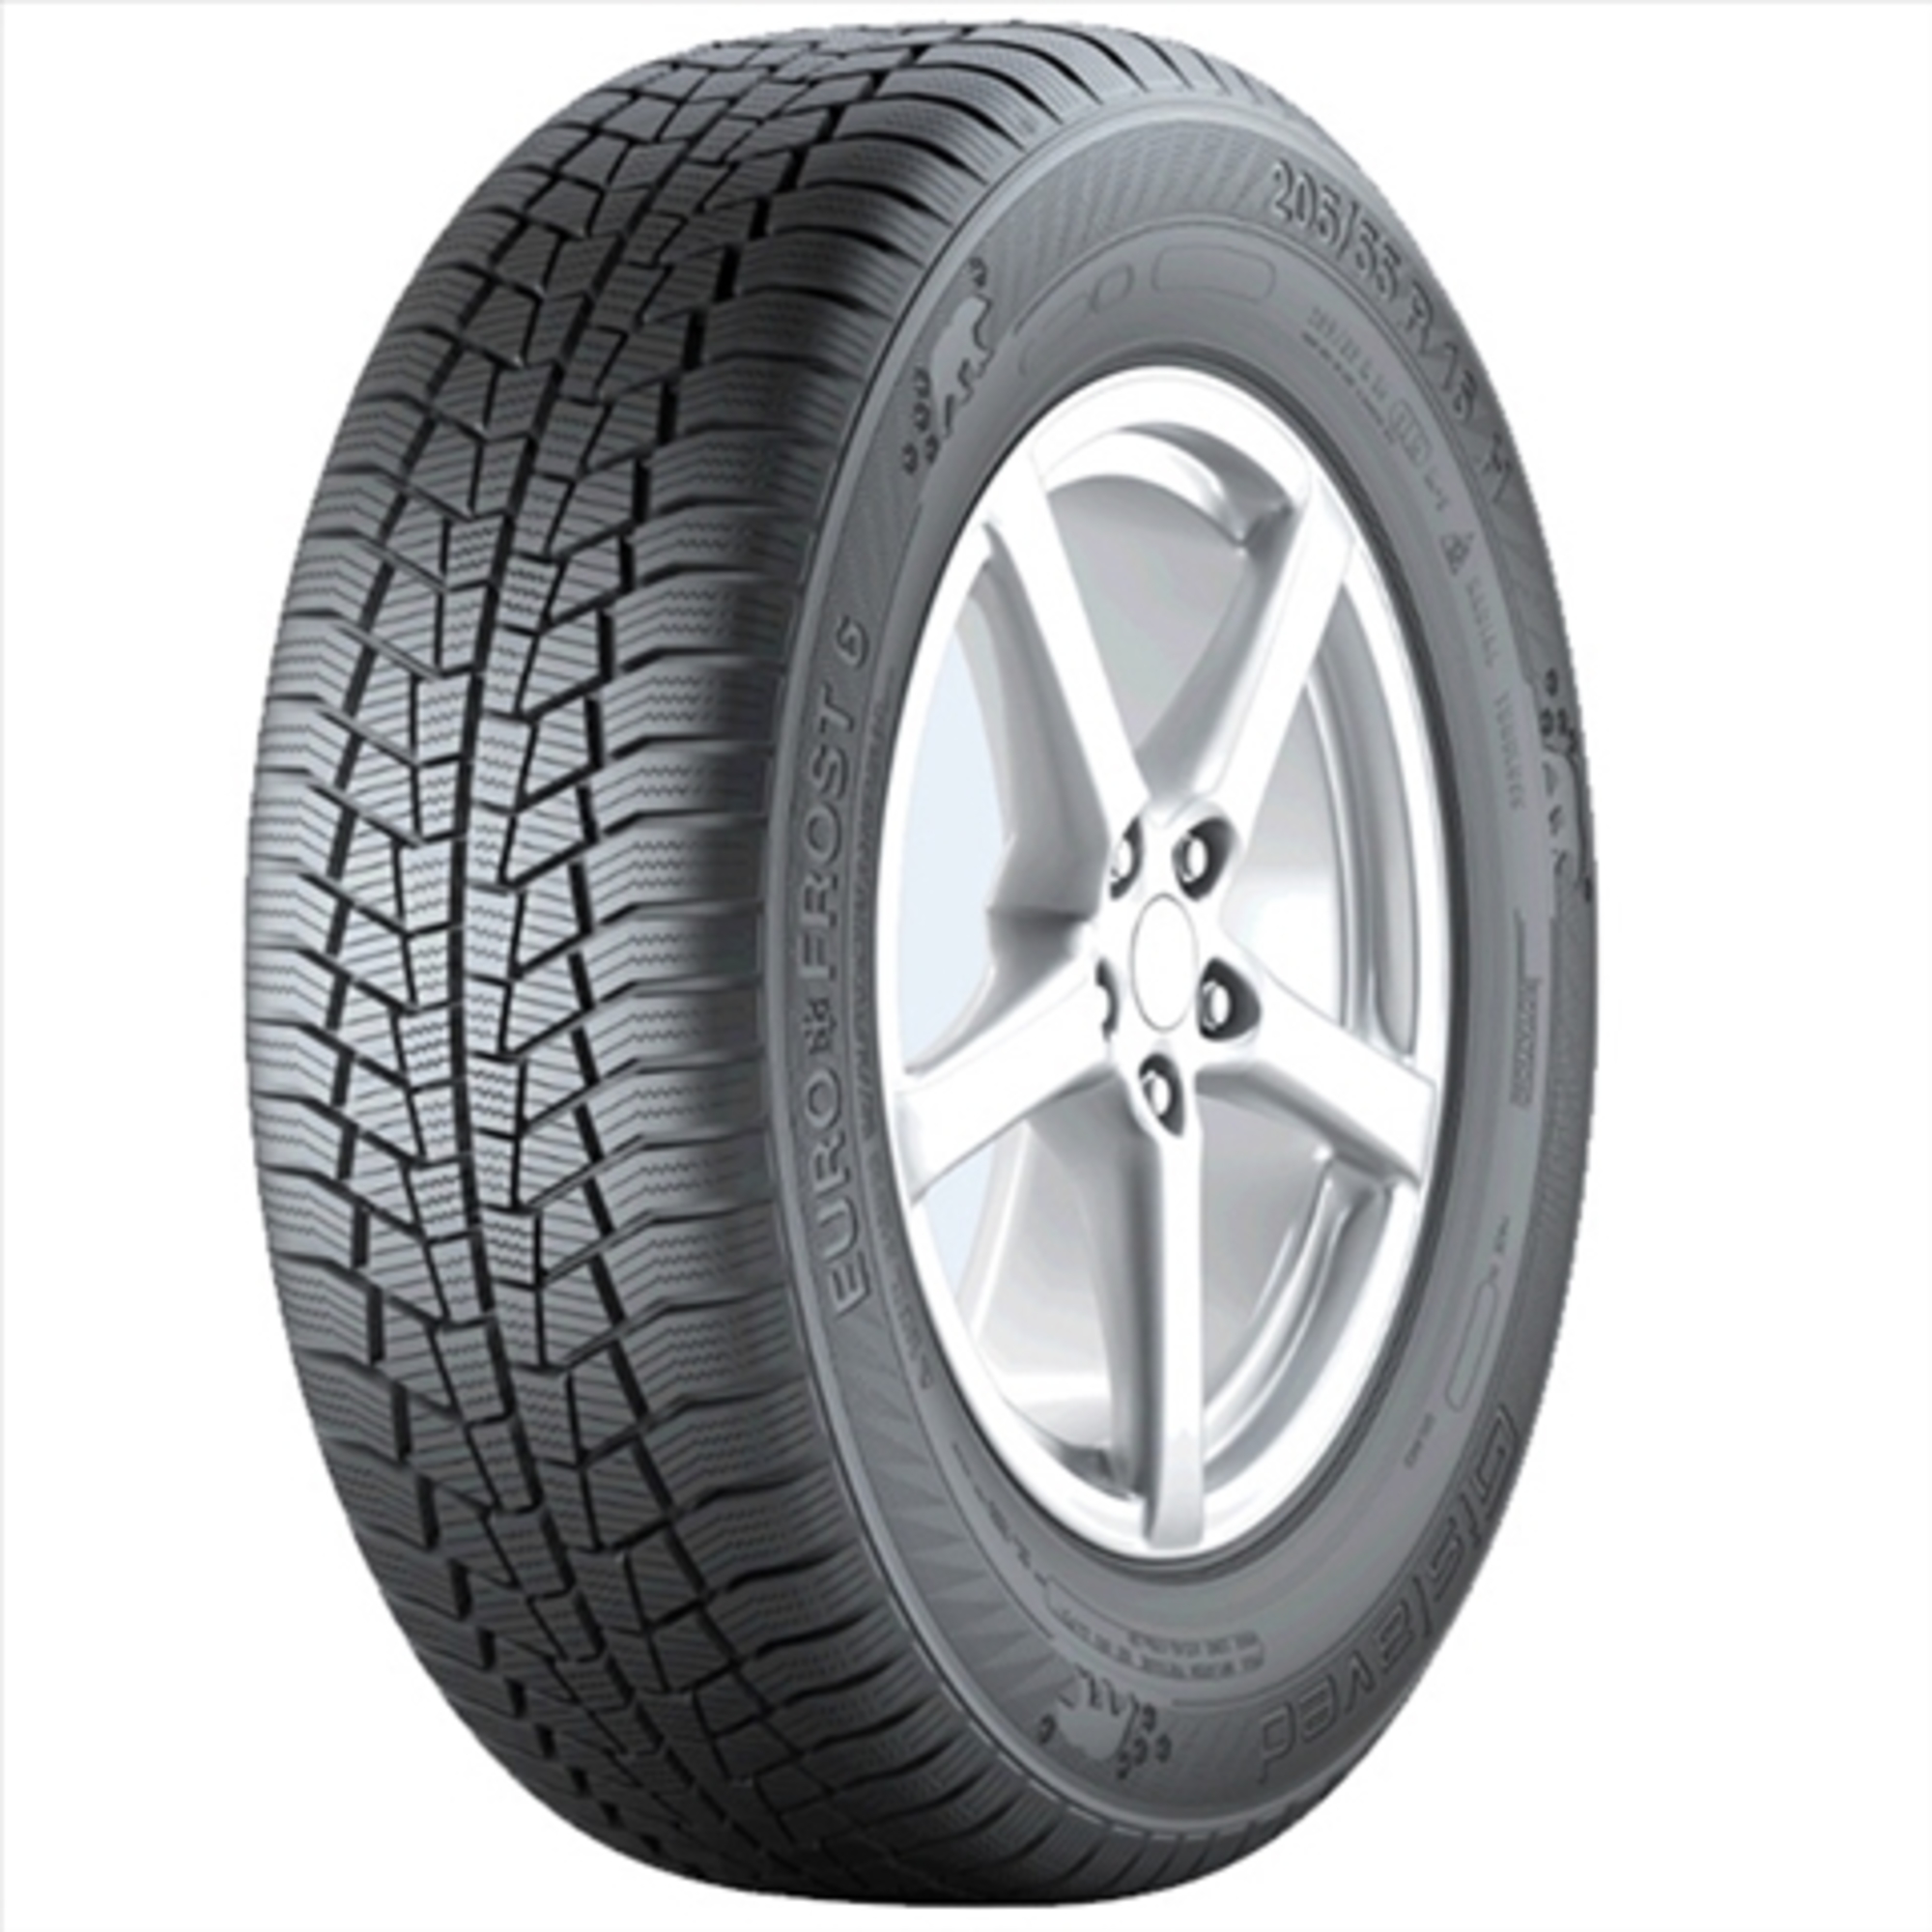 165/70r14 81t euro*frost 6 A03434870000CO GISLAVED